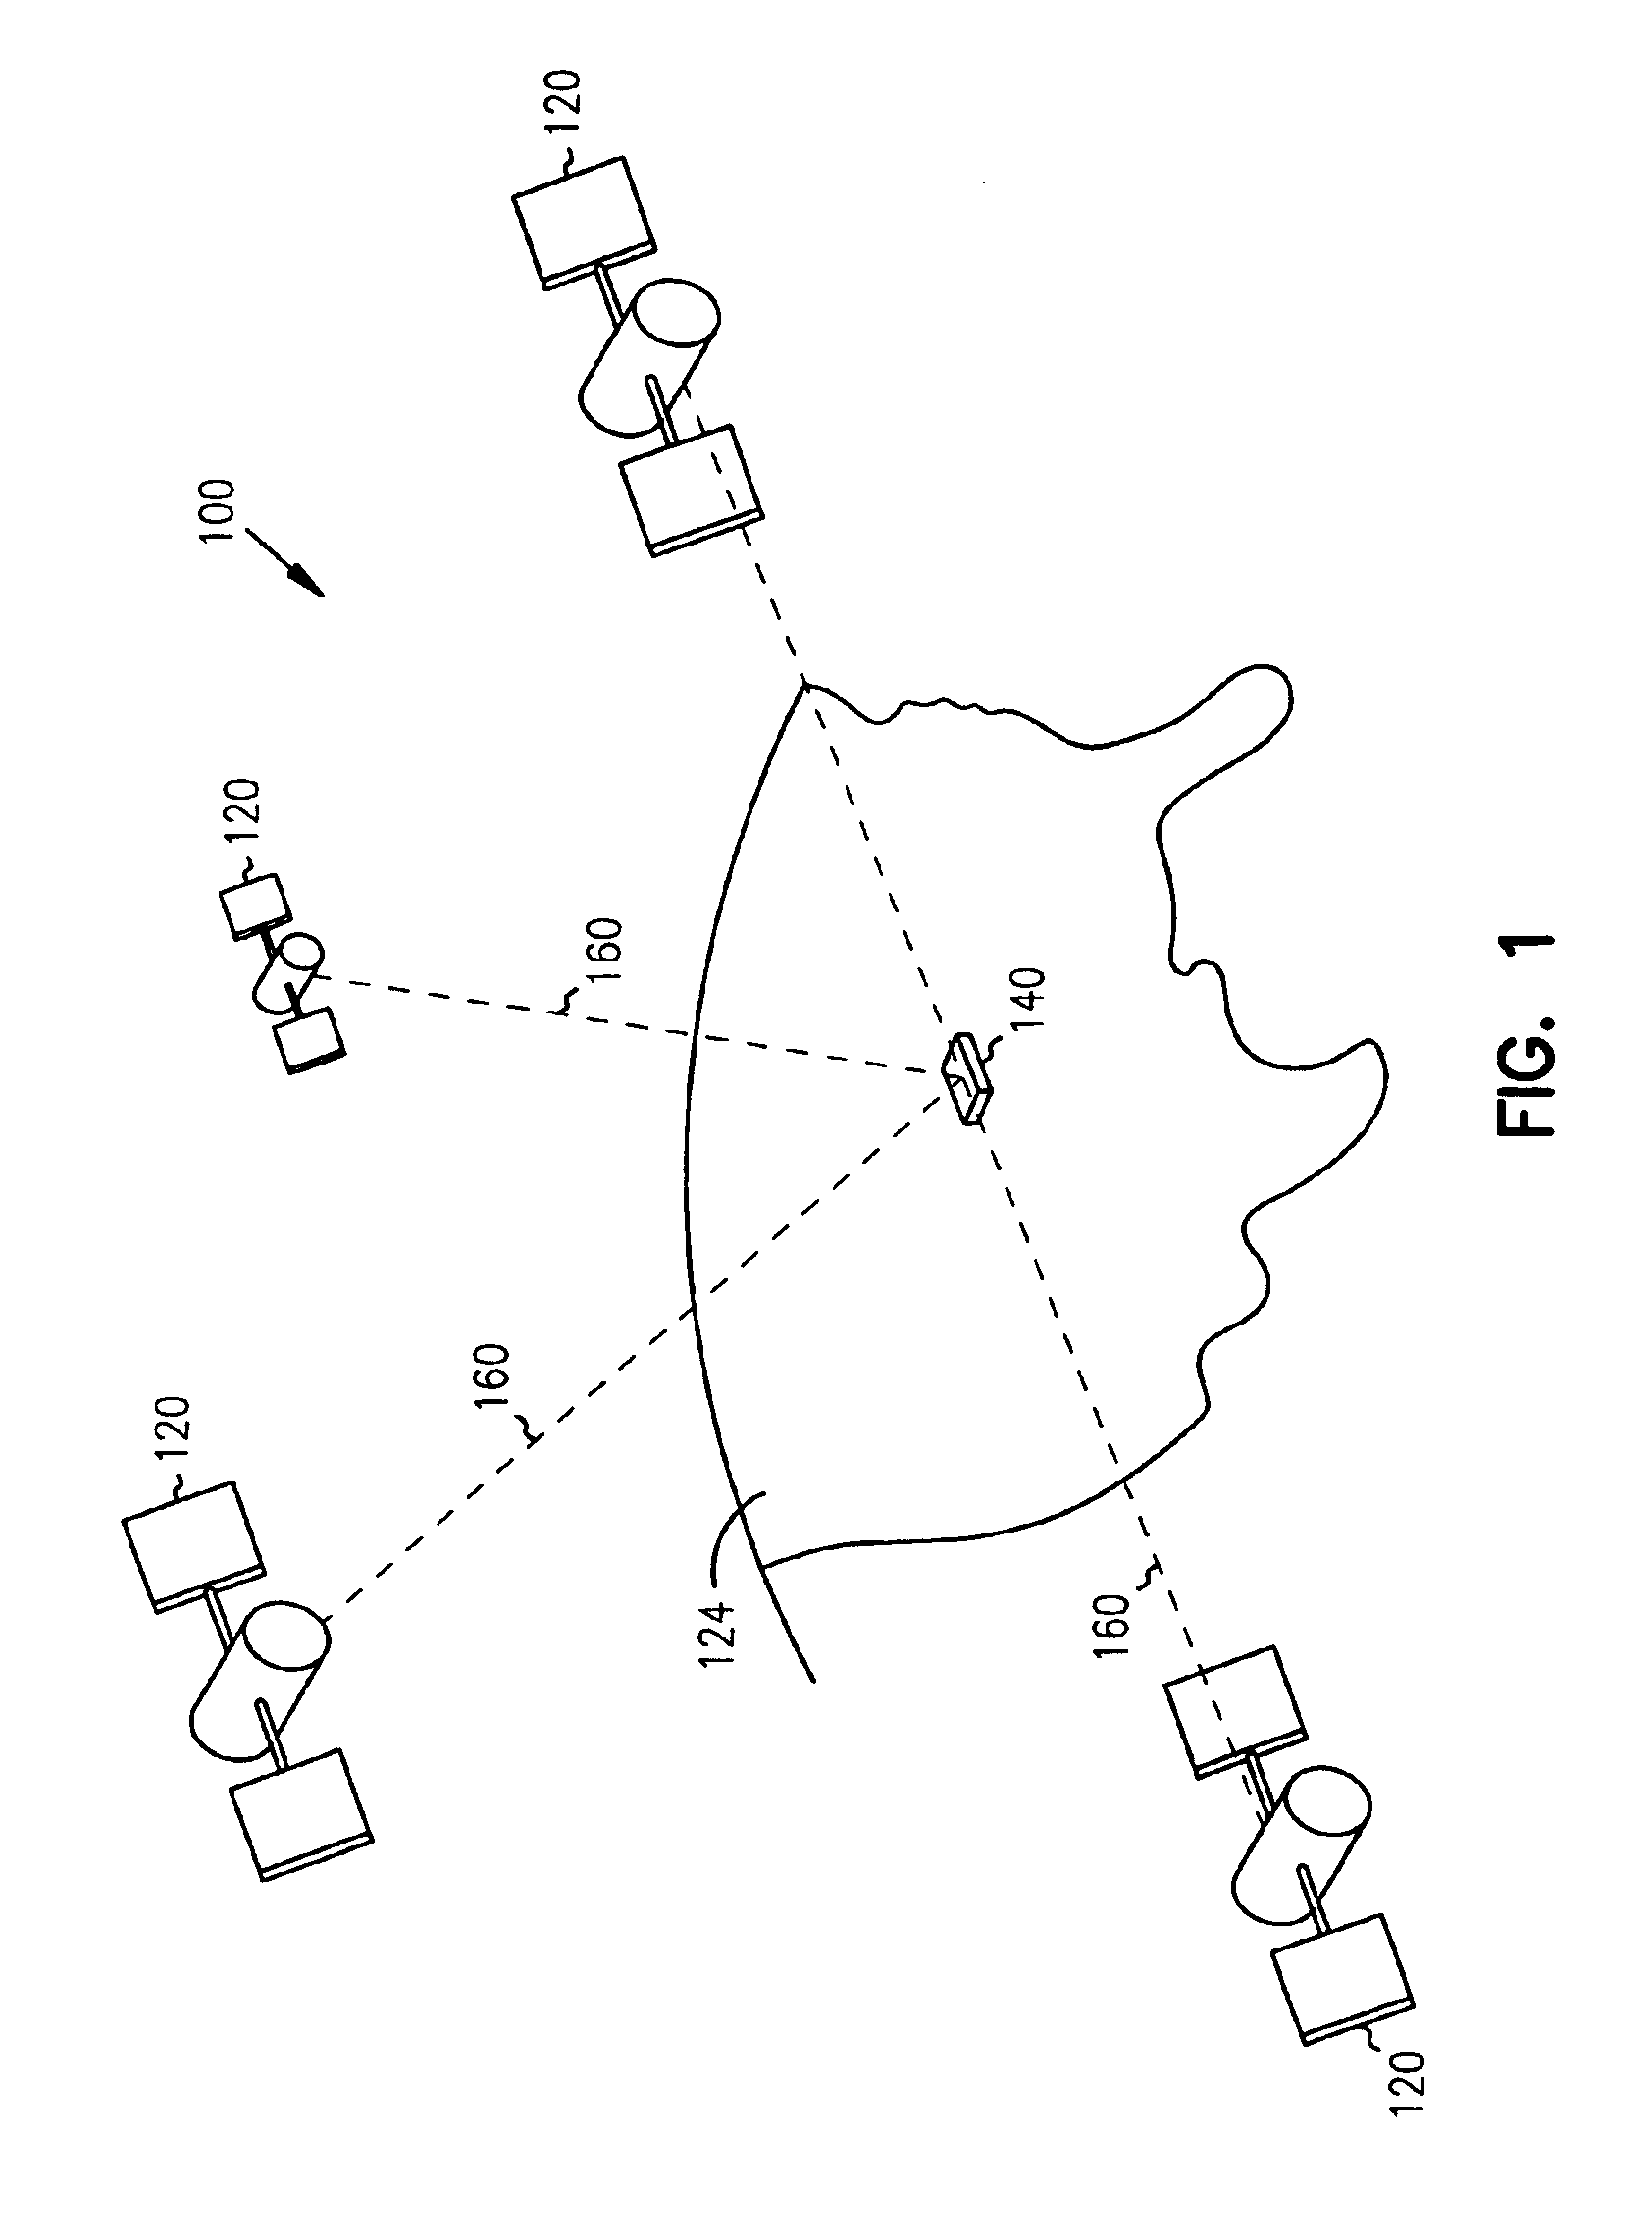 Navigation system, method and device with voice guidance